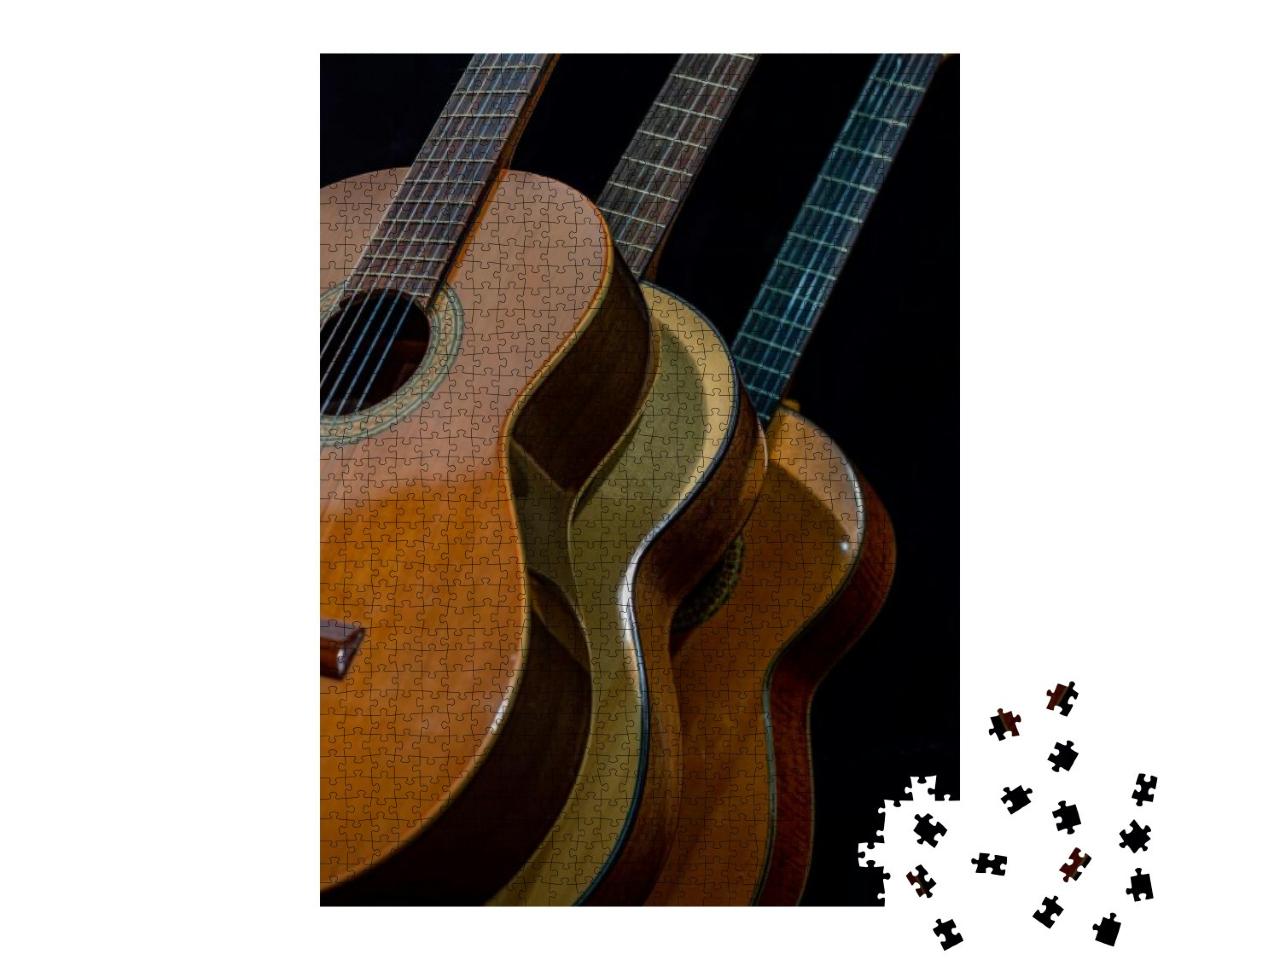 Spanish Guitars for an Instrumental Concert Concept... Jigsaw Puzzle with 1000 pieces